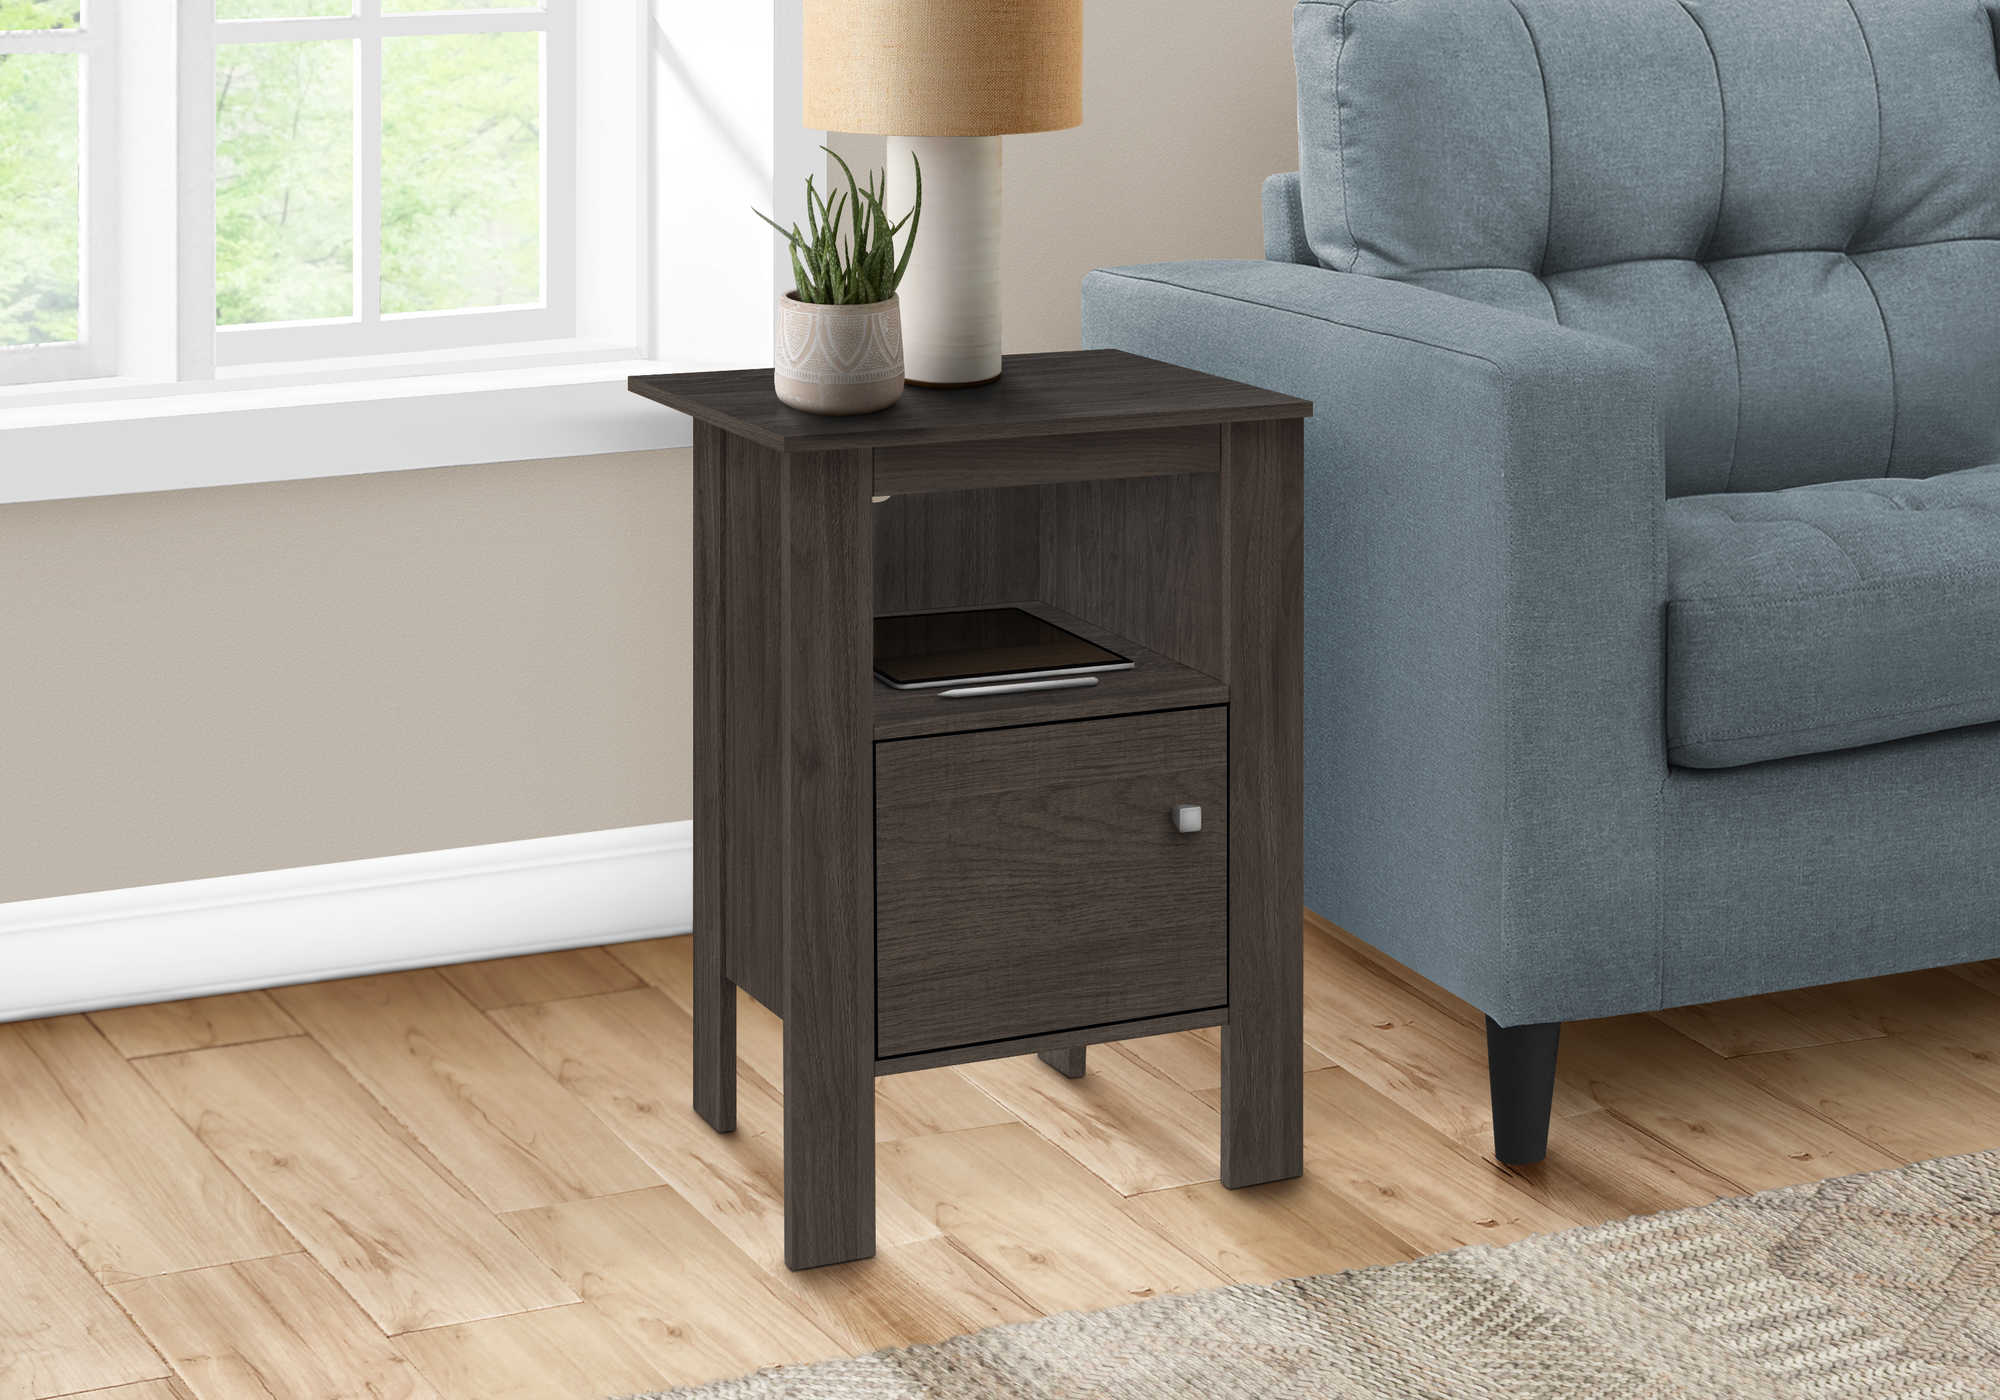 ACCENT TABLE - BROWN OAK NIGHT STAND WITH STORAGE